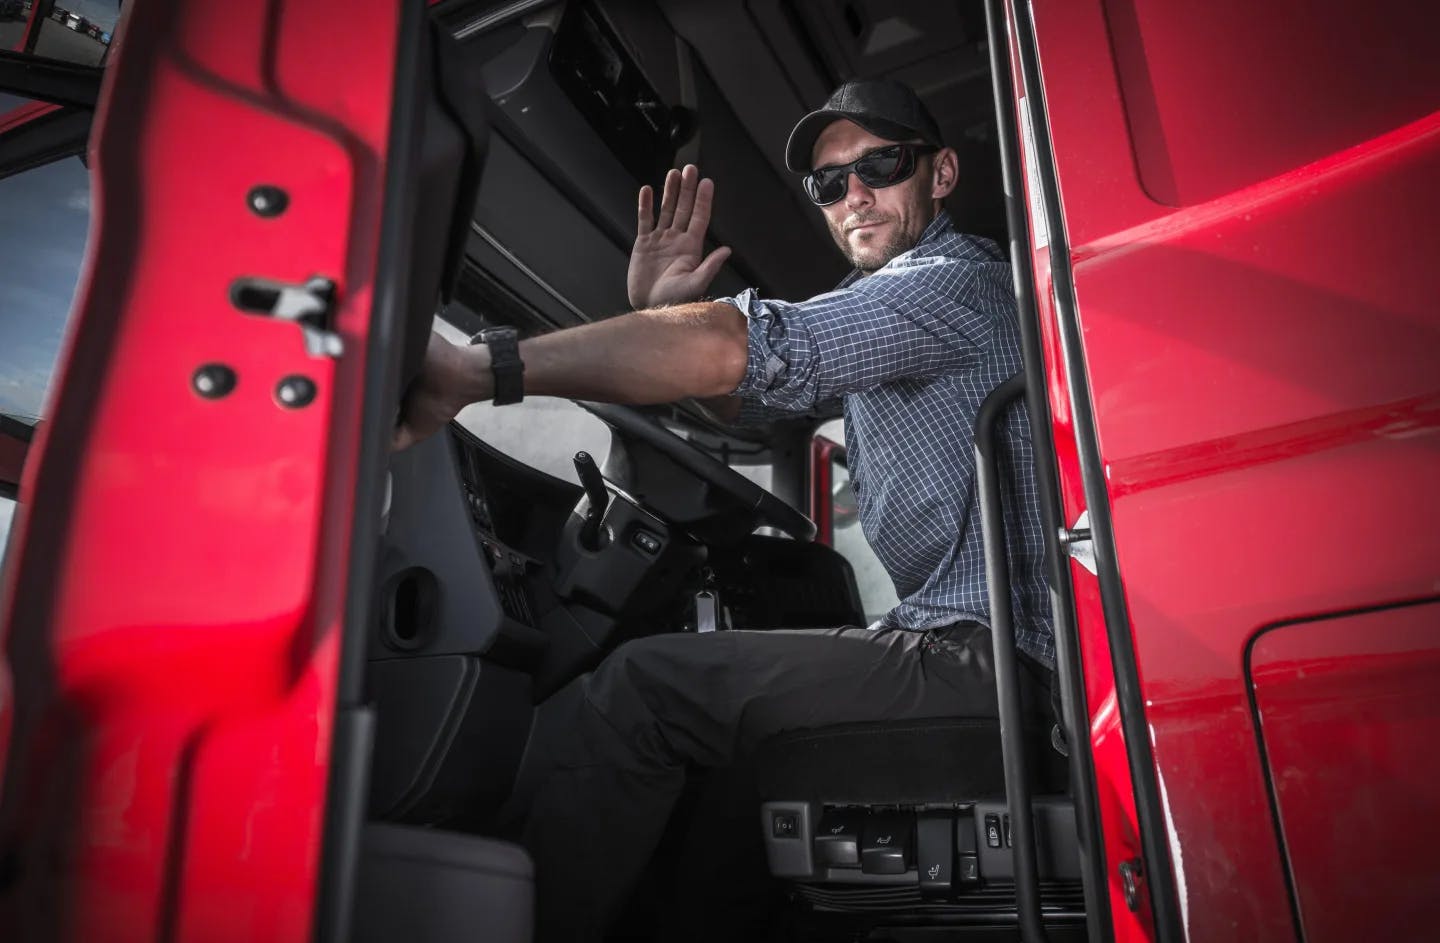 Trucker waving from inside the cab of the truck